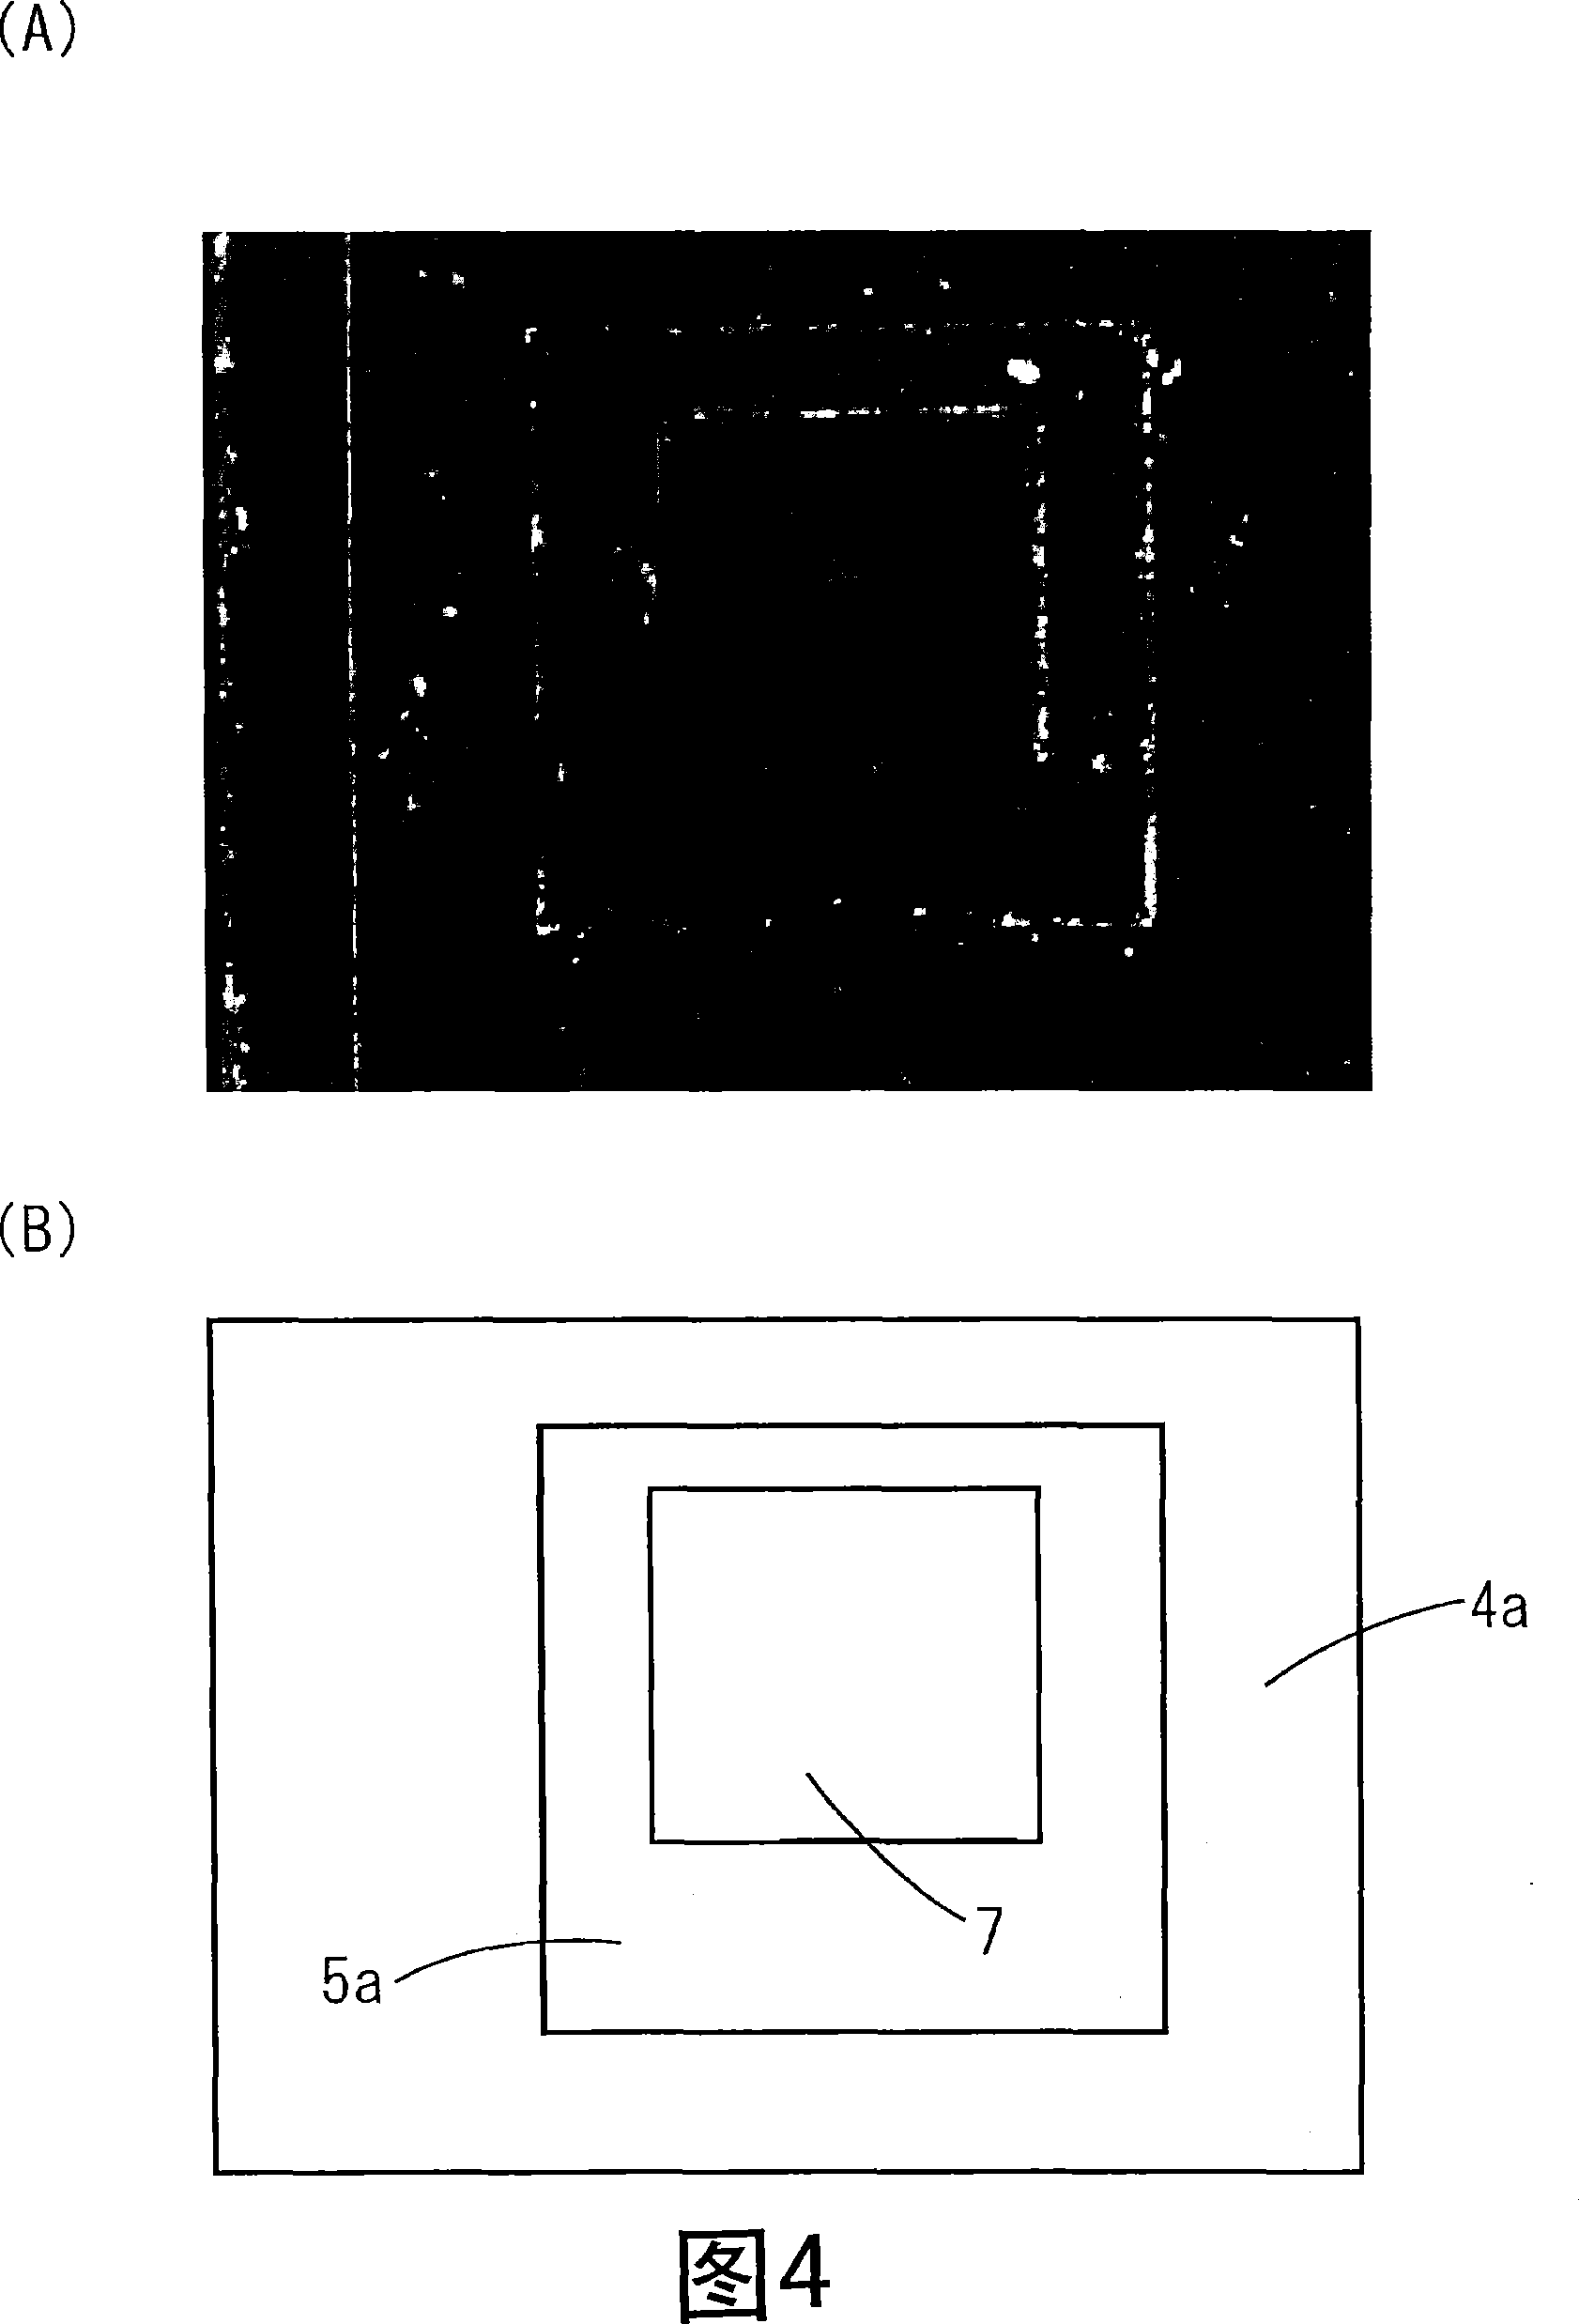 Sub-mount and its manufacturing method